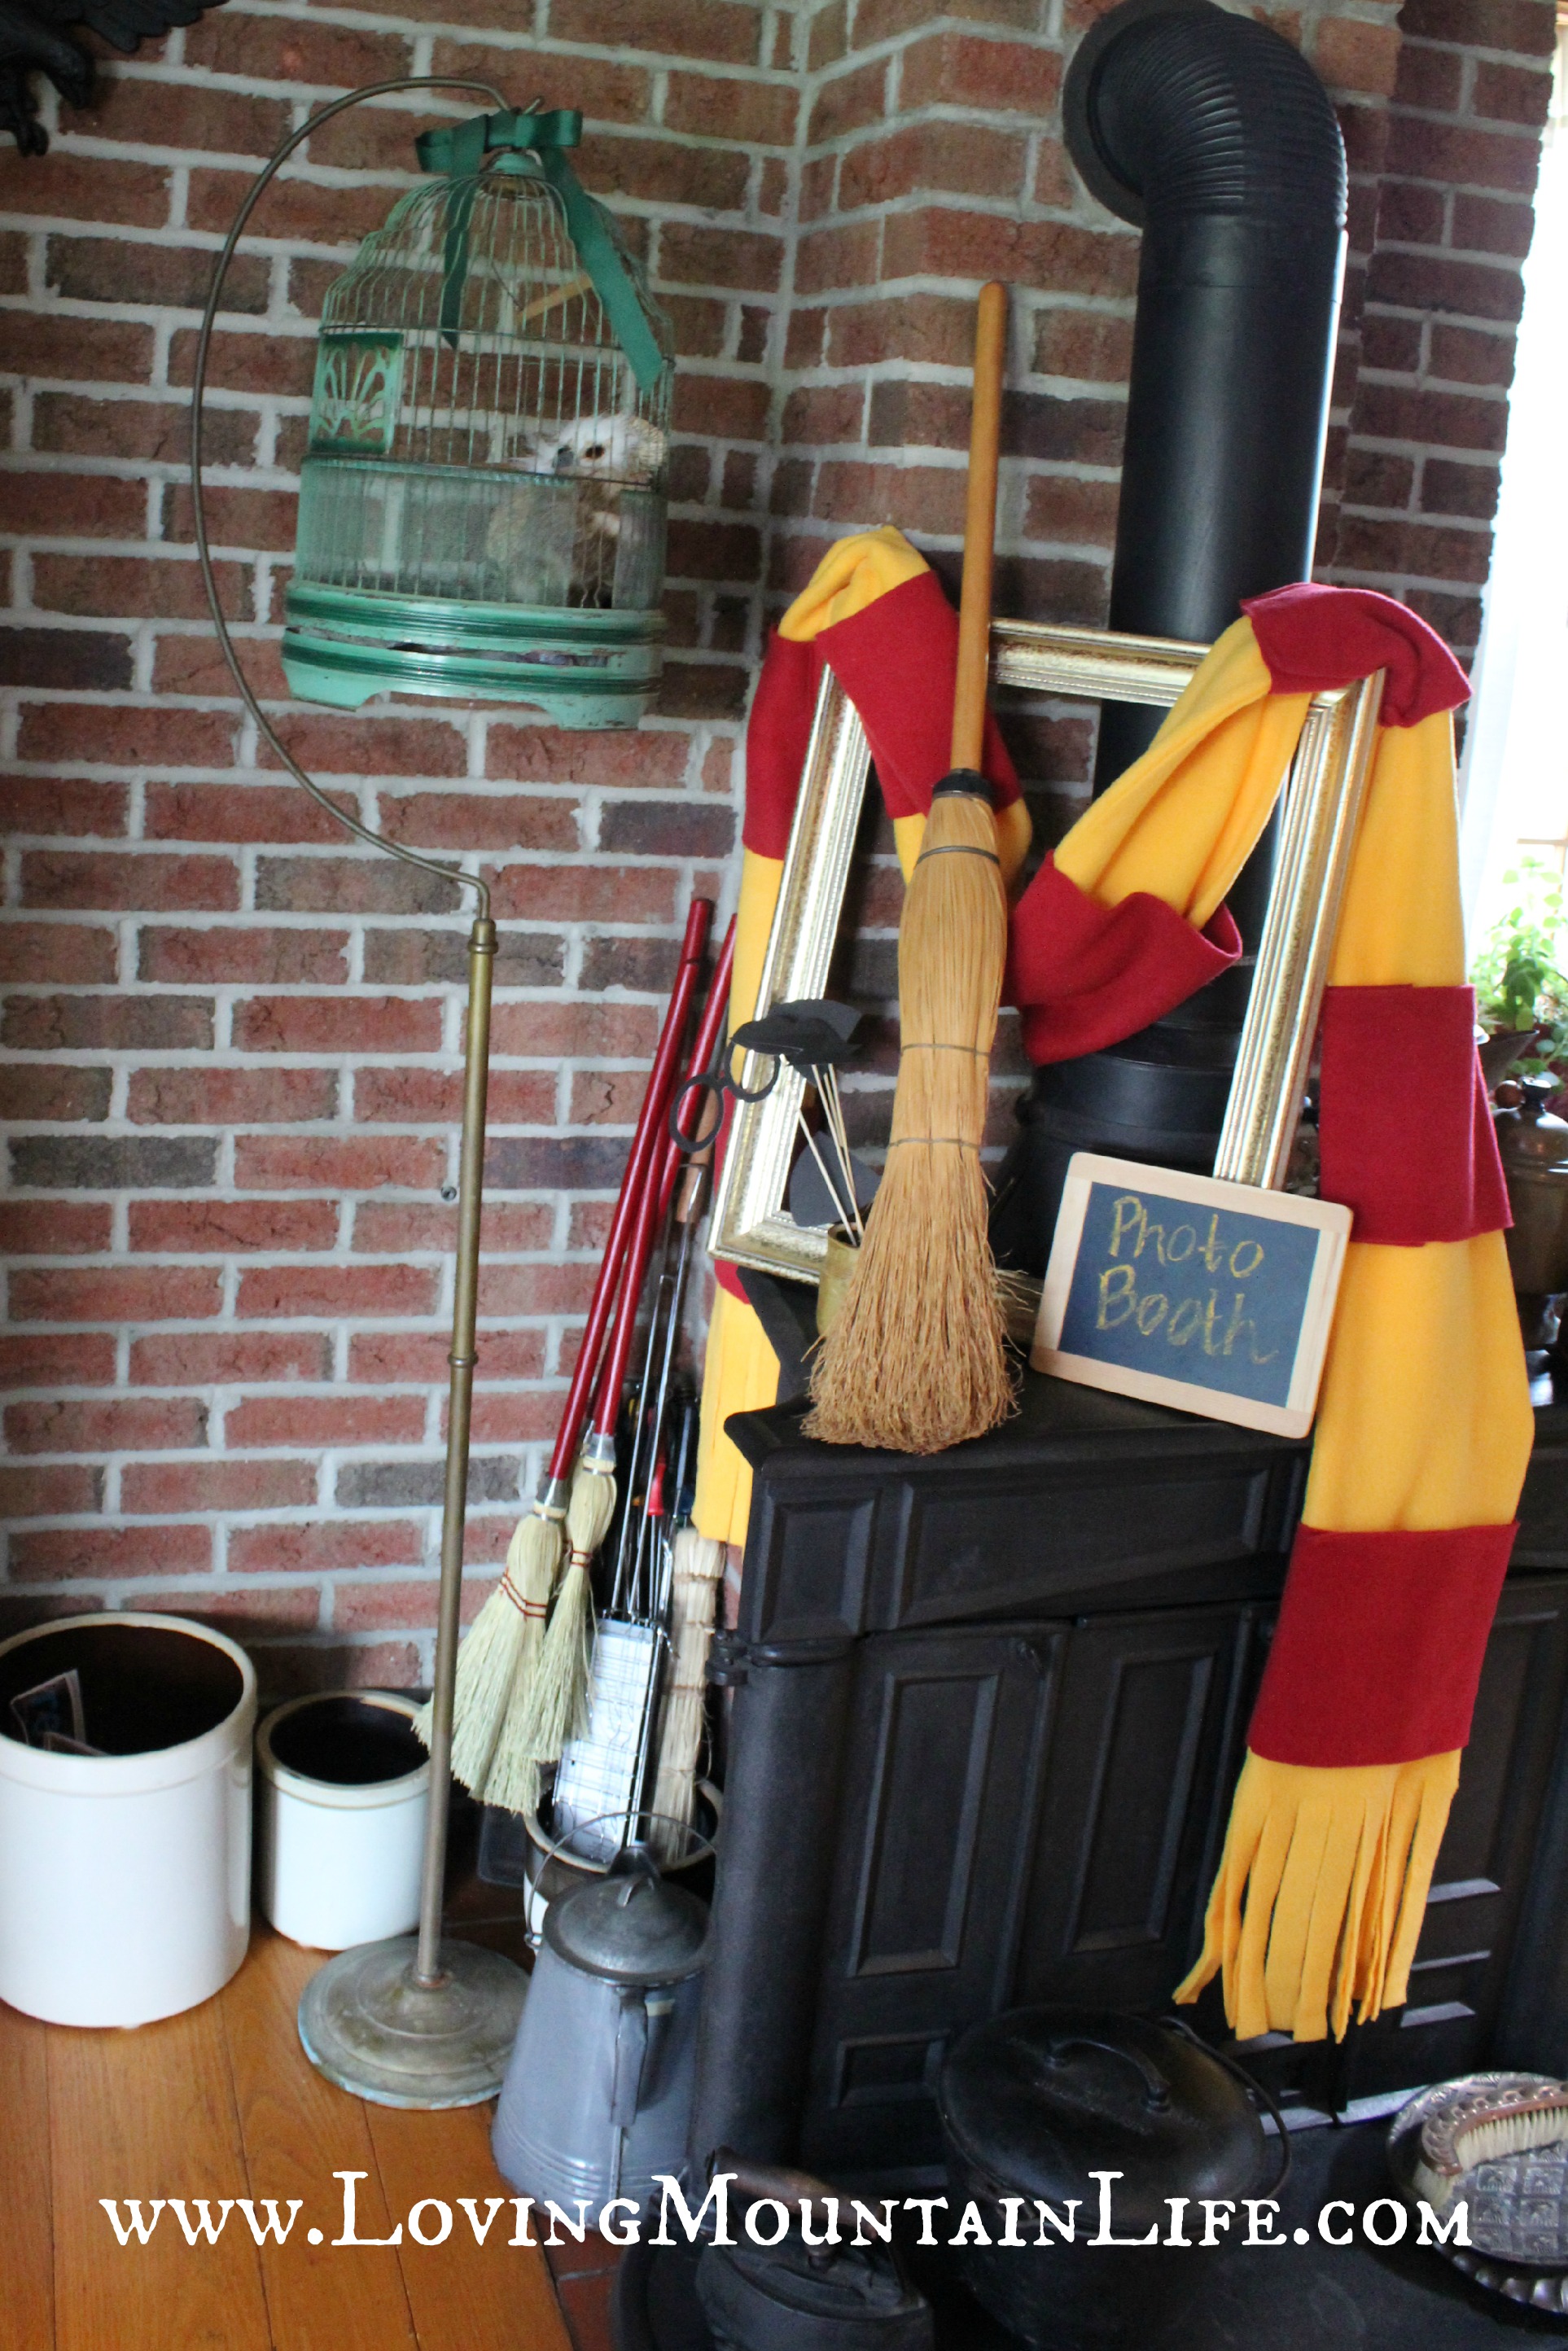 Photo booth at a Harry Potter party